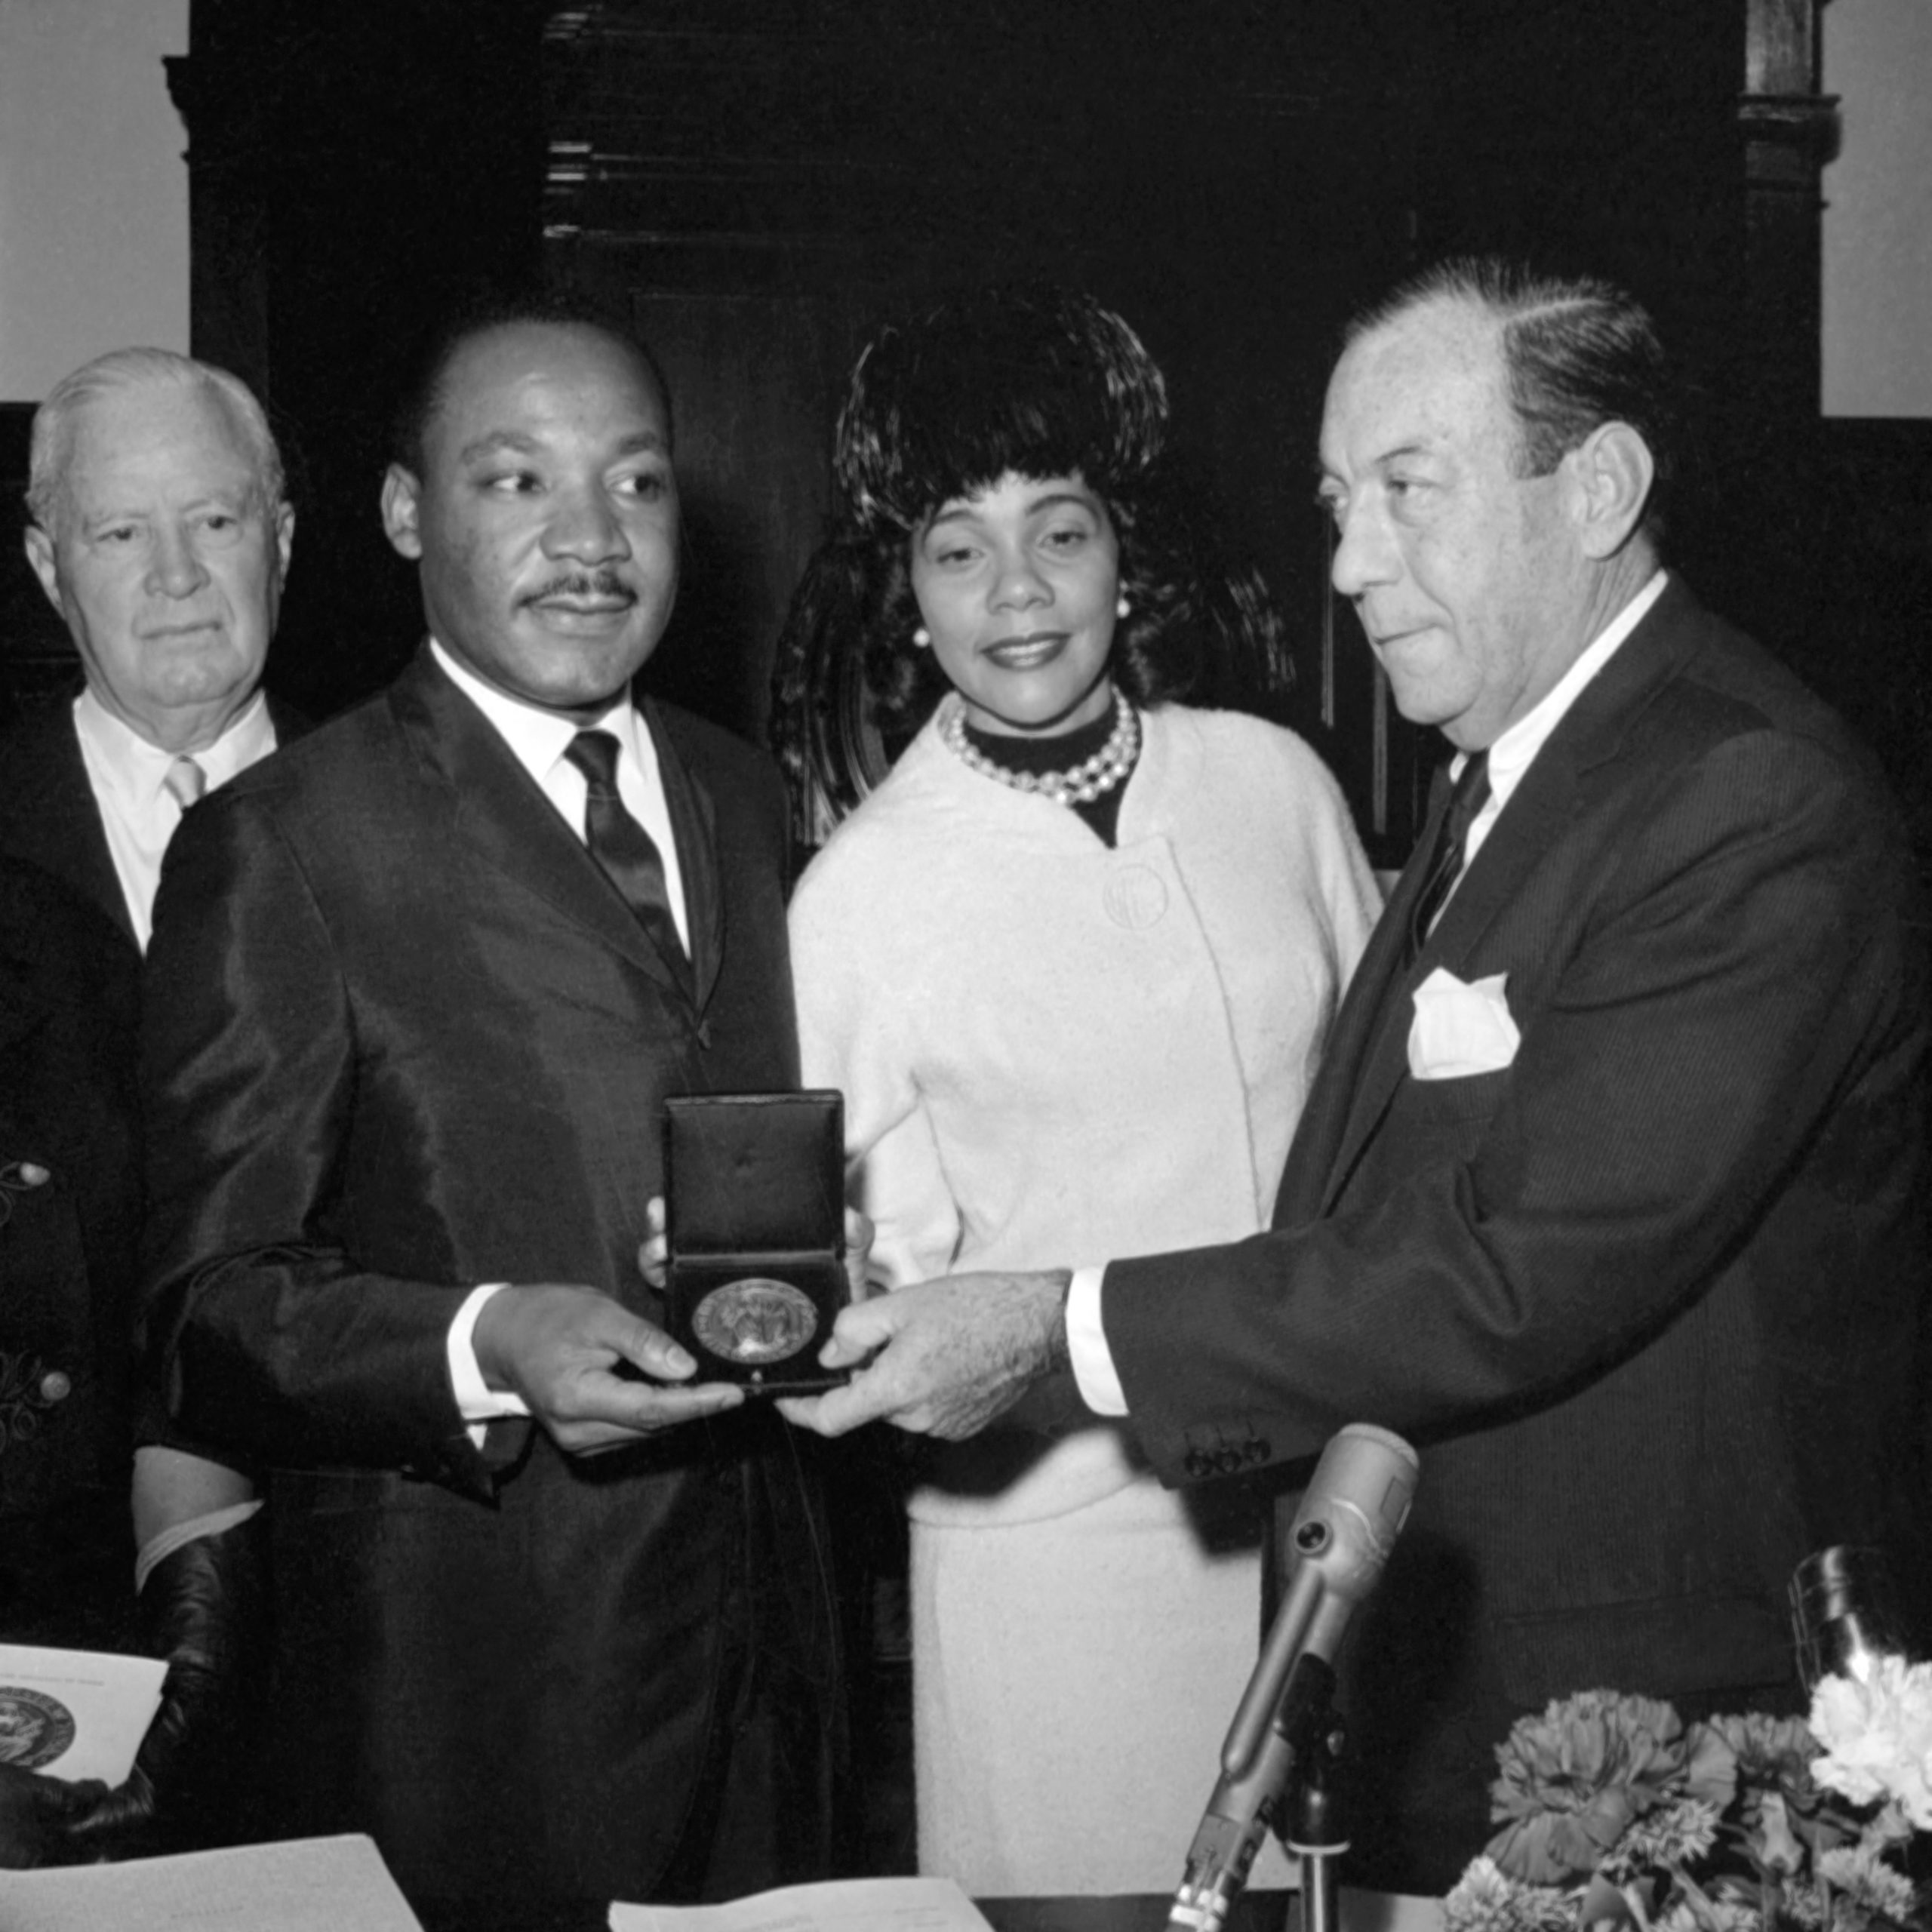 US clergyman and leader of the Movement against Racial Segregation Martin Luther King (L) receives the New-York medal of honor from New-York's mayor Robert Wagner (R), as his wife Coretta Scott king (C) looks on, on December 18, 1964 in New-York. Martin Luther King was coming back from Oslo where he received the 1964 Nobel Peace Prize. The only black man whose birthday is a national holiday, Martin Luther King was the leader of the moral fight against racism in America wen he was fatally shot by James Earl Ray 04 April 1968 at the age of 39. (Photo by -/AFP via Getty Images)